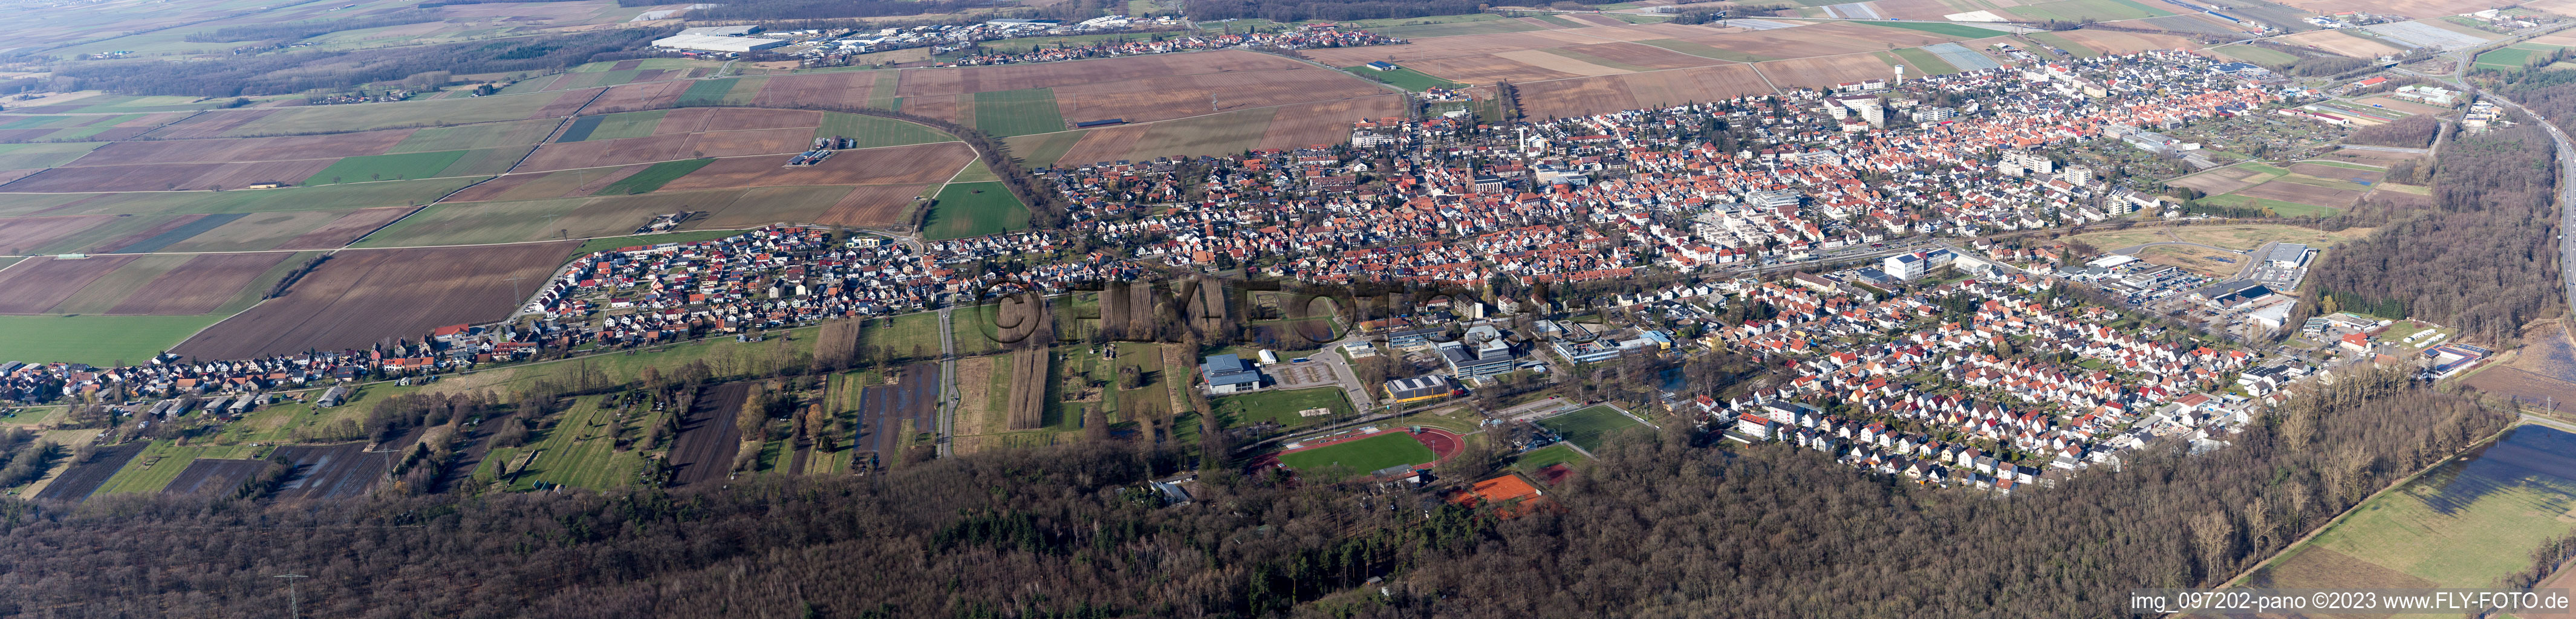 Aerial view of Panorama in Kandel in the state Rhineland-Palatinate, Germany